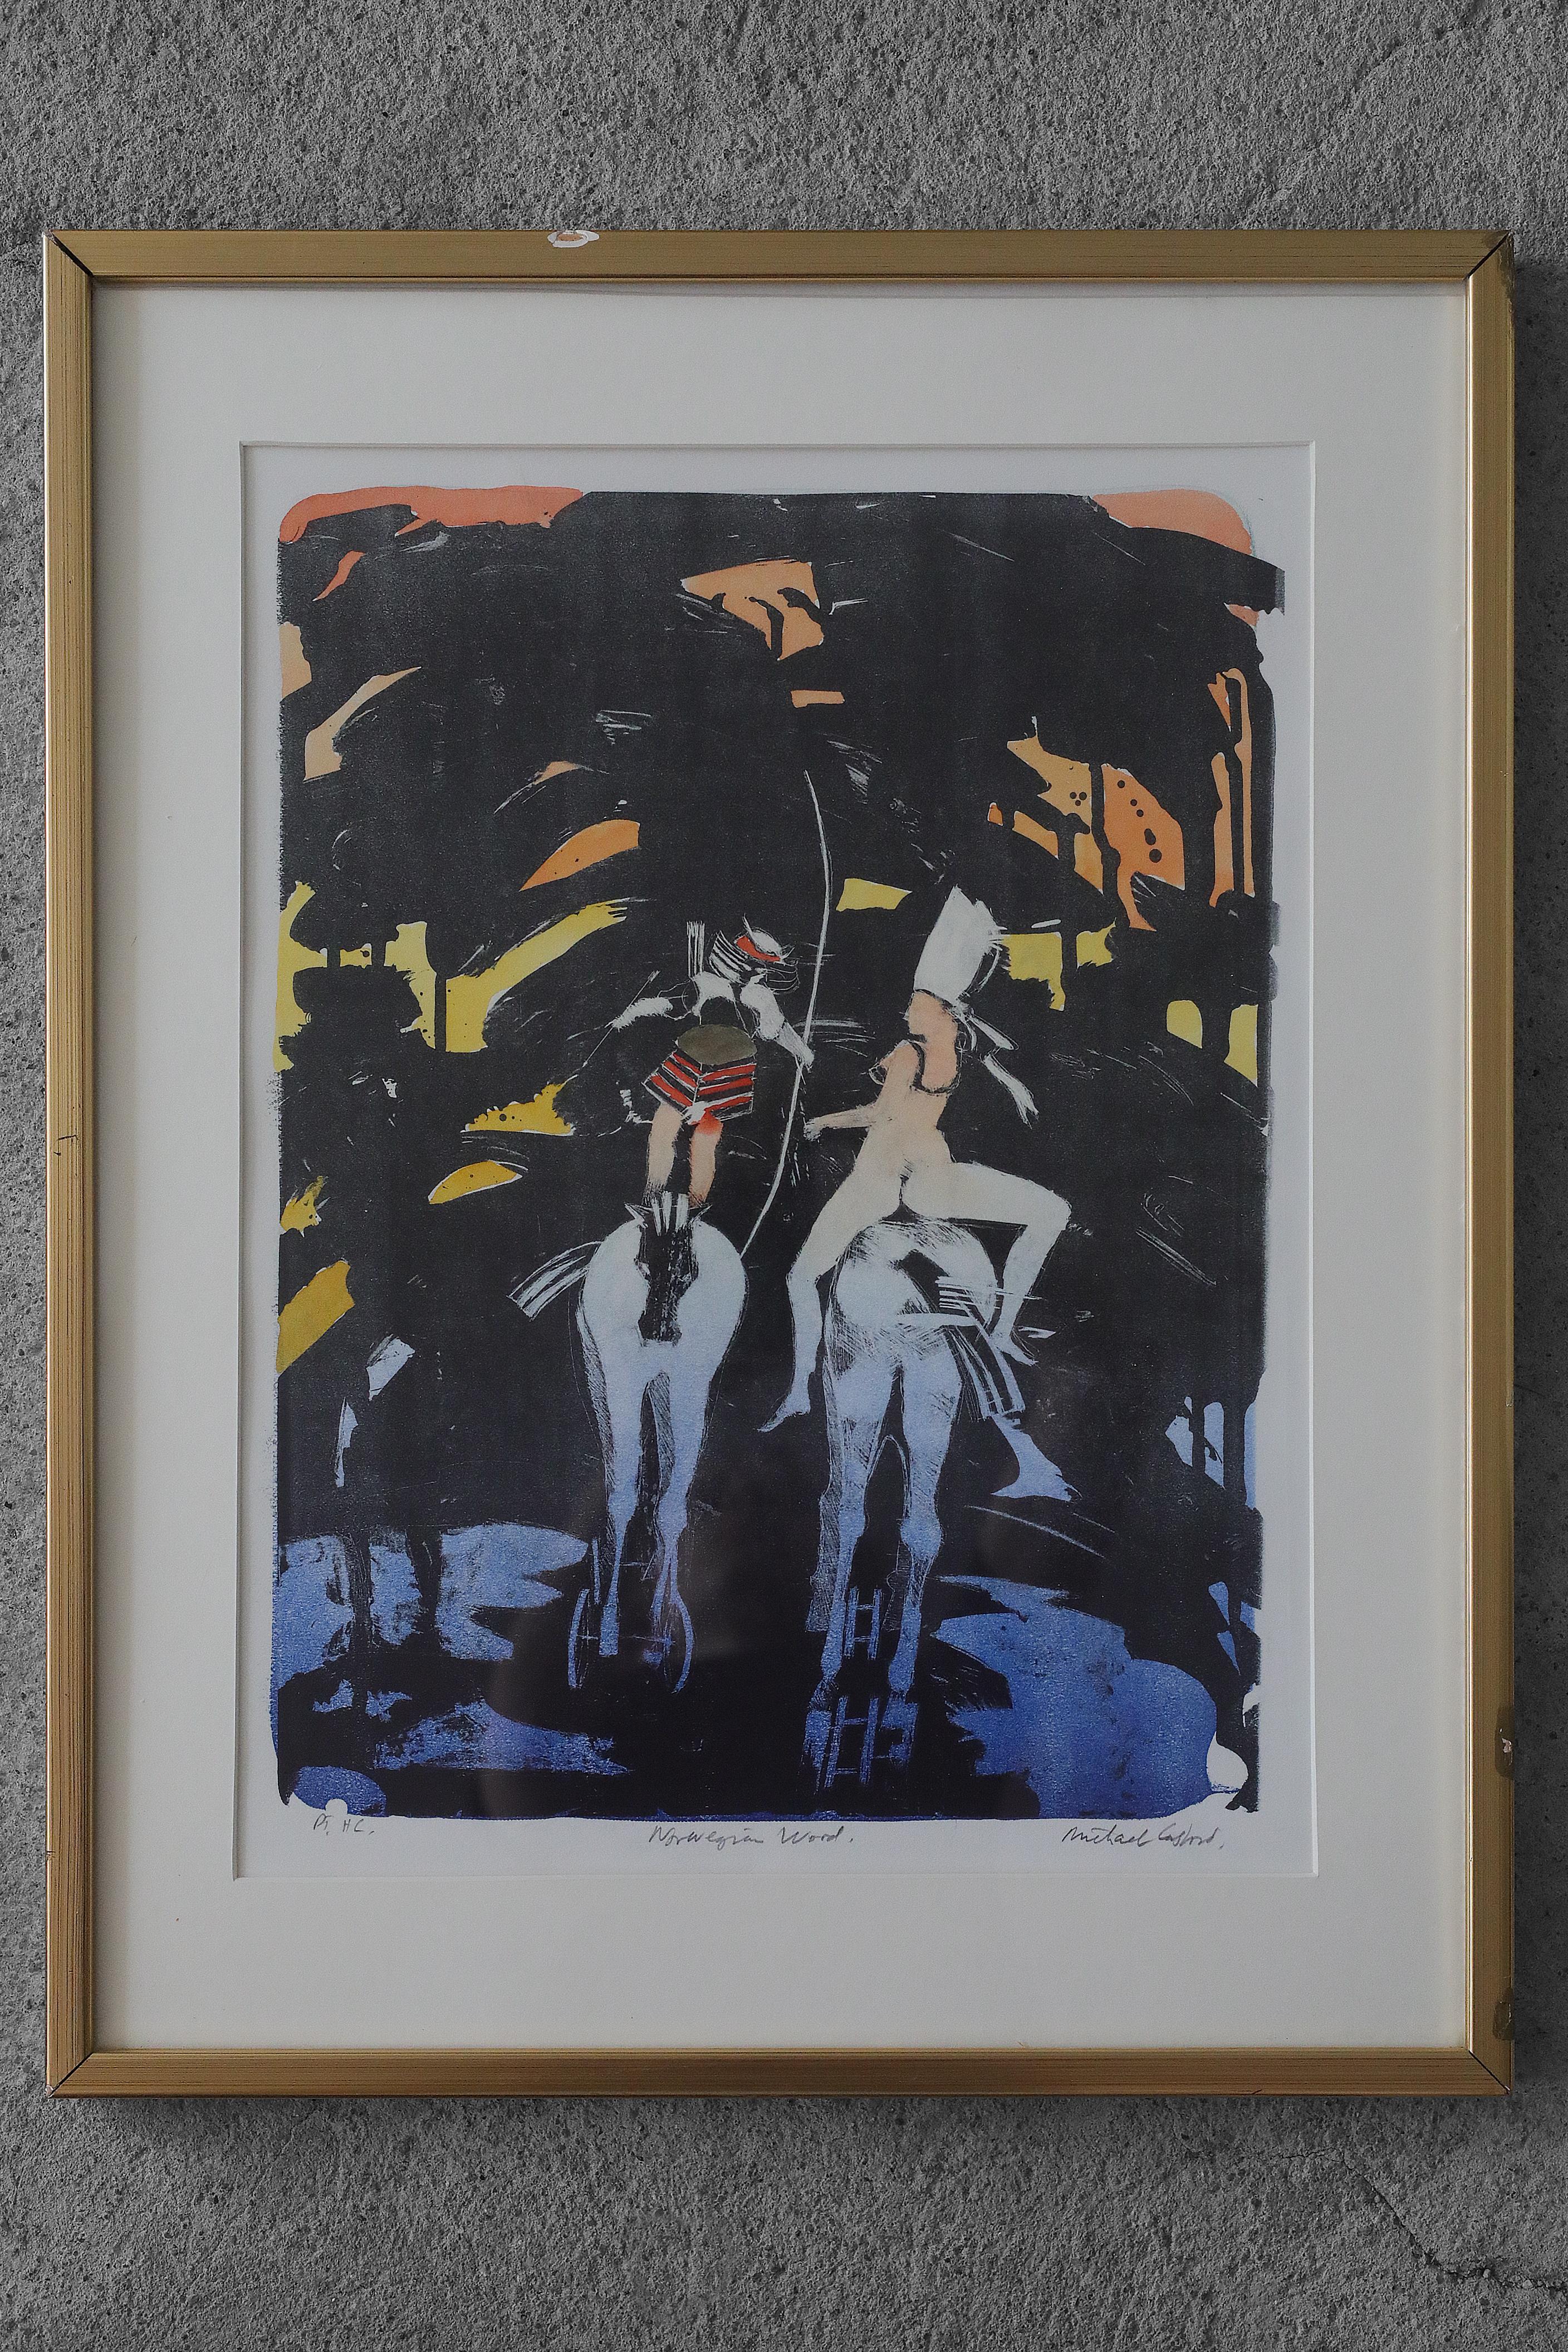 Mid-Century Modern Michael Casford, Norwegian Word, Color Lithography, Framed For Sale